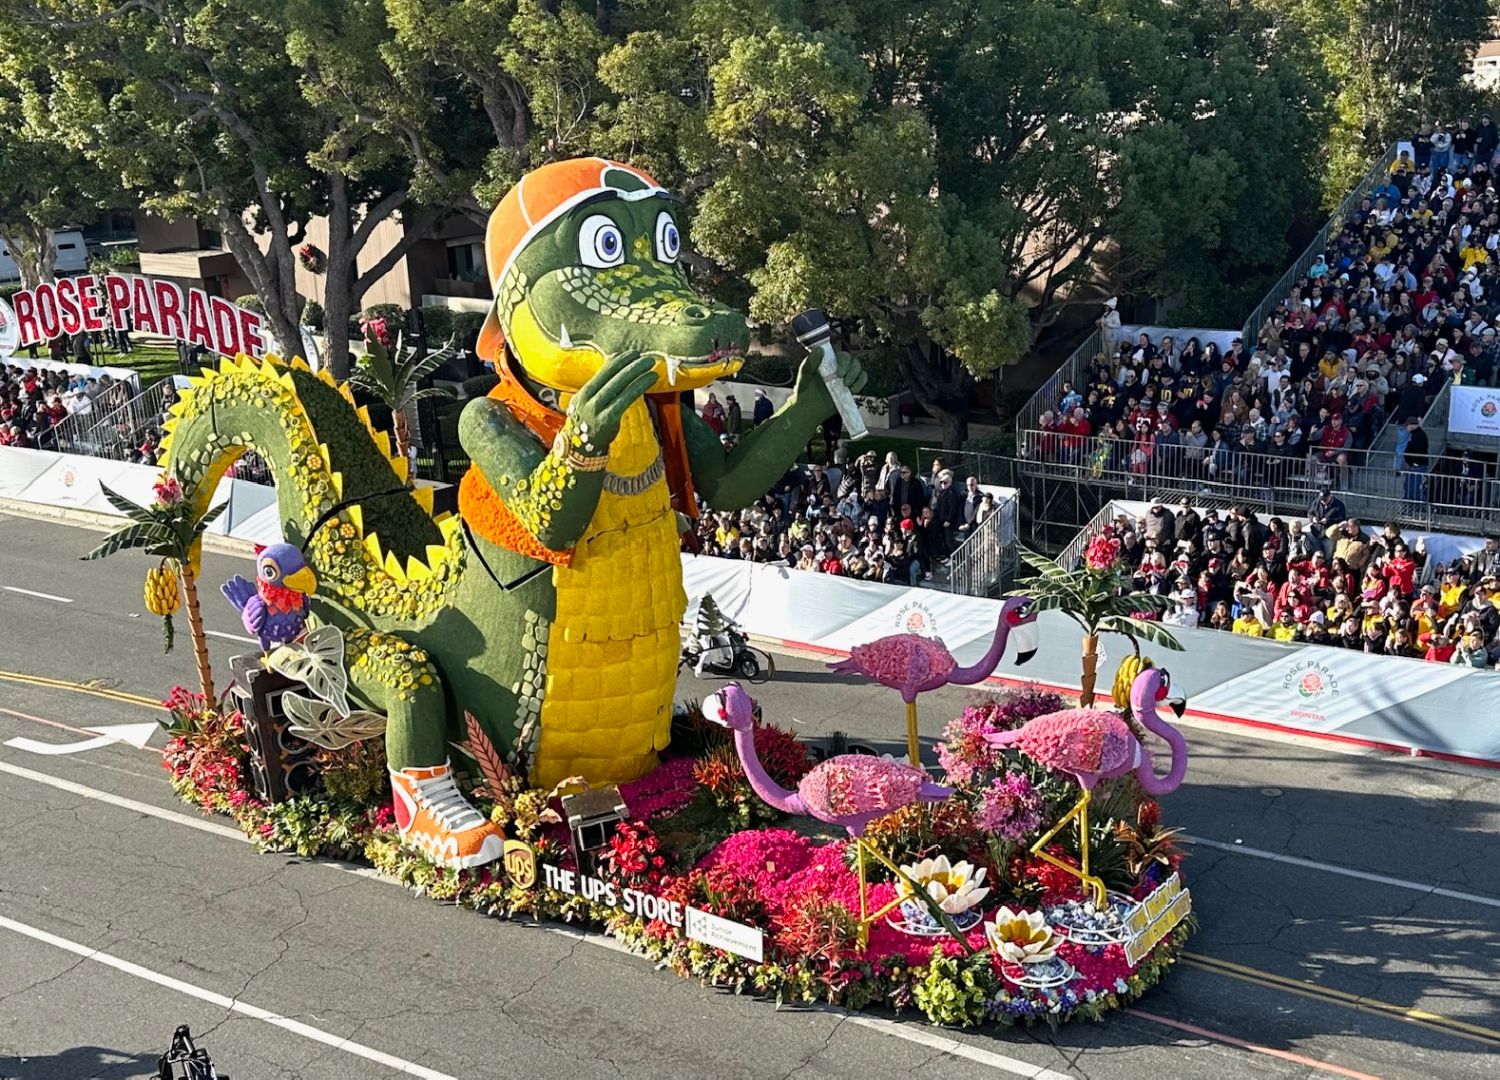 PHOTO: Bill Glazier | The South Pasadenan | UPS Stores captured the award for most whimsical and amusing float for their "Beat of Achievement" entry.